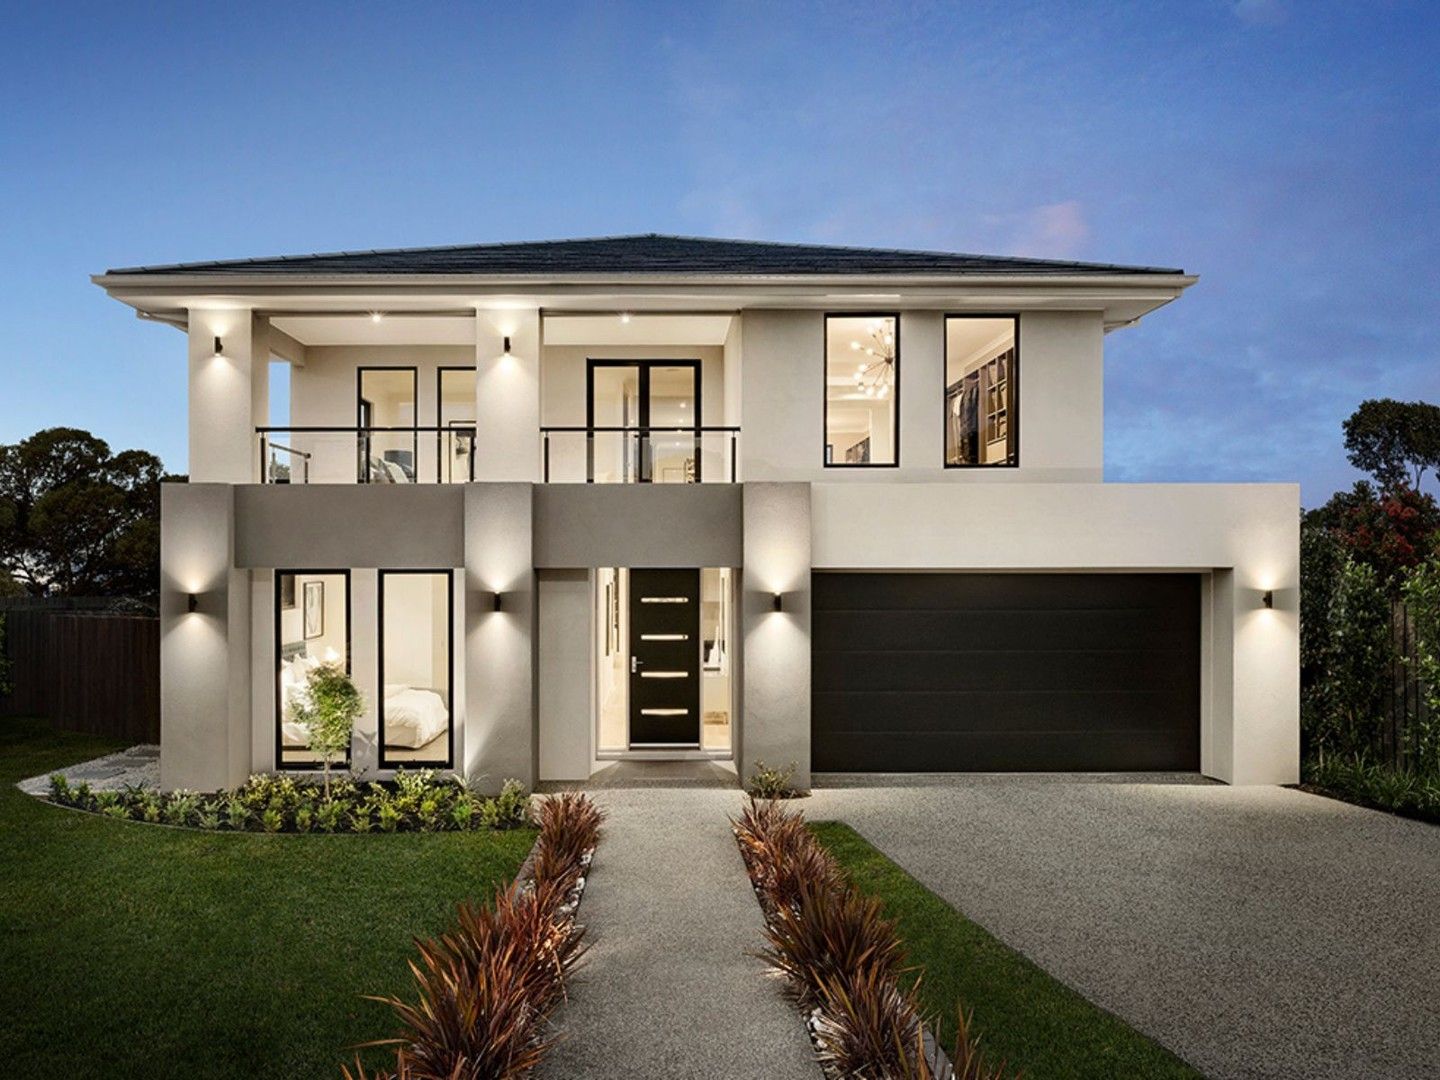 5 bedrooms New House & Land in Ready To Build BOX HILL NSW, 2765